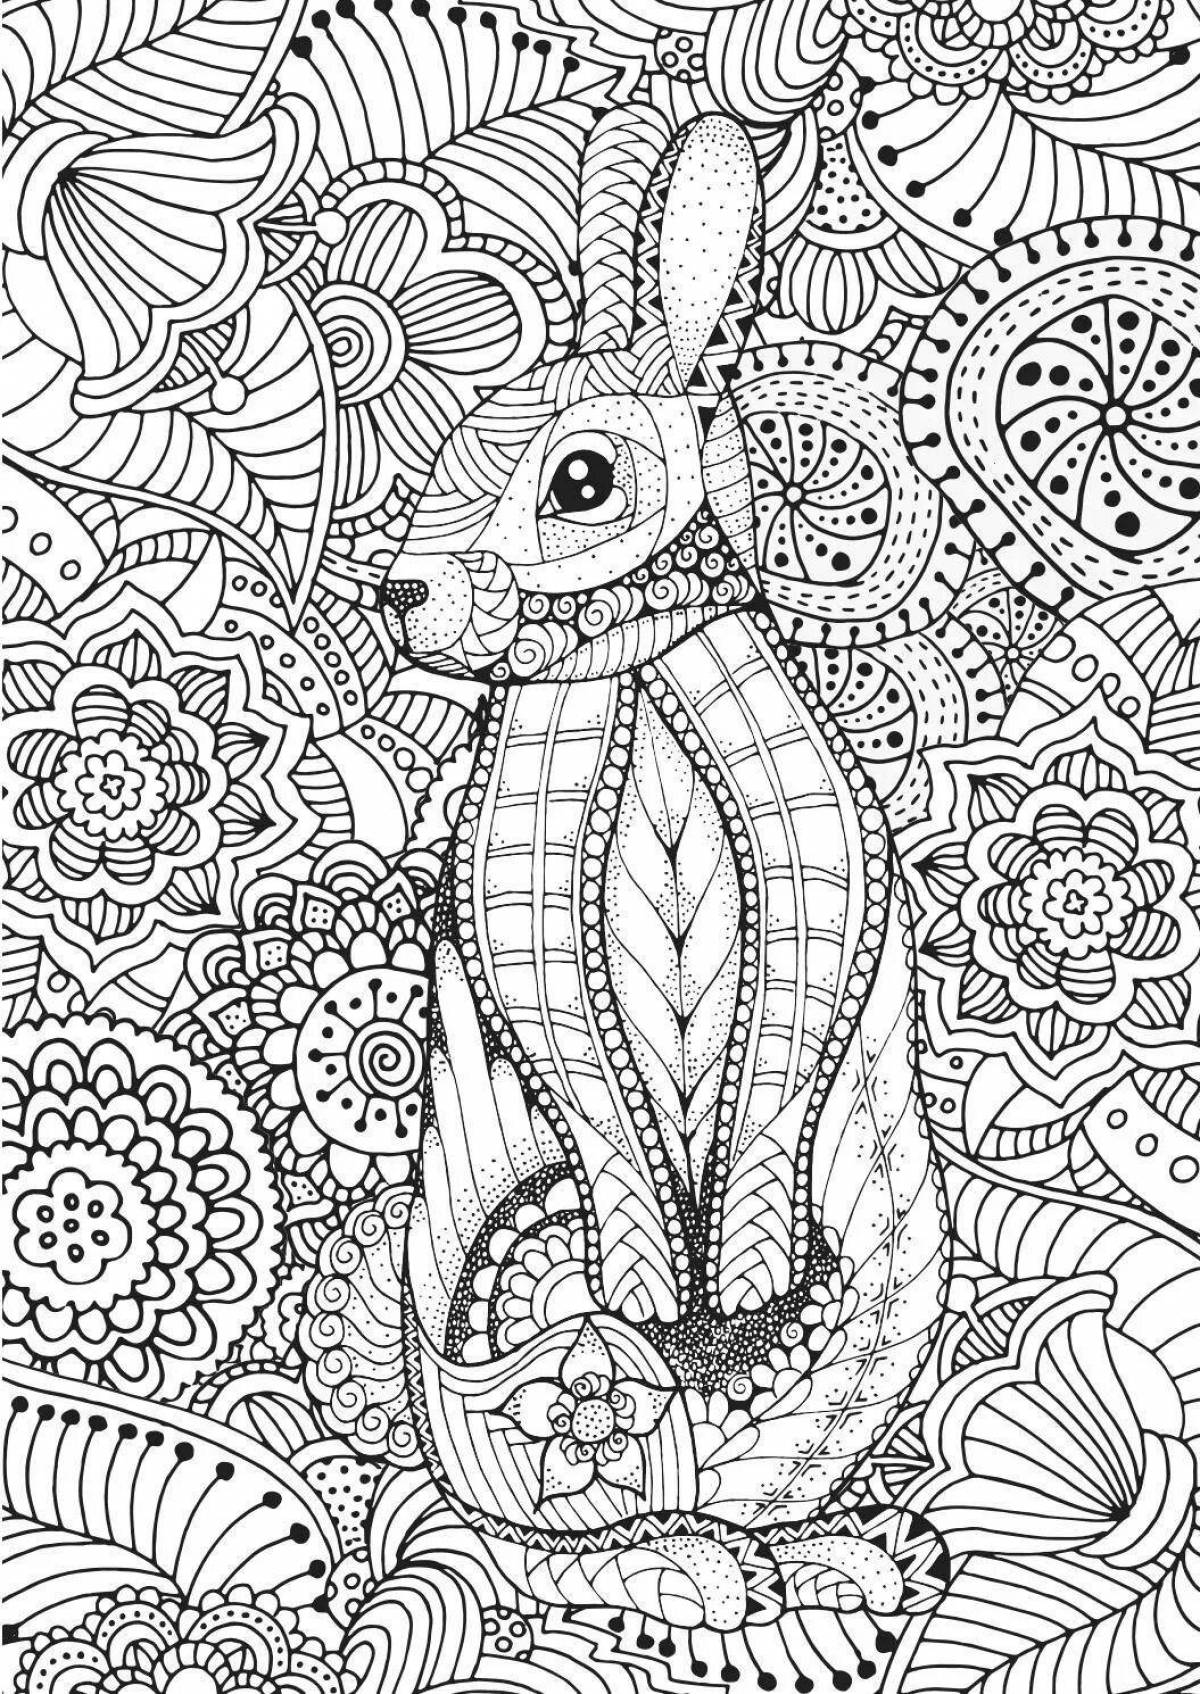 Fun coloring book antistress for adults 18